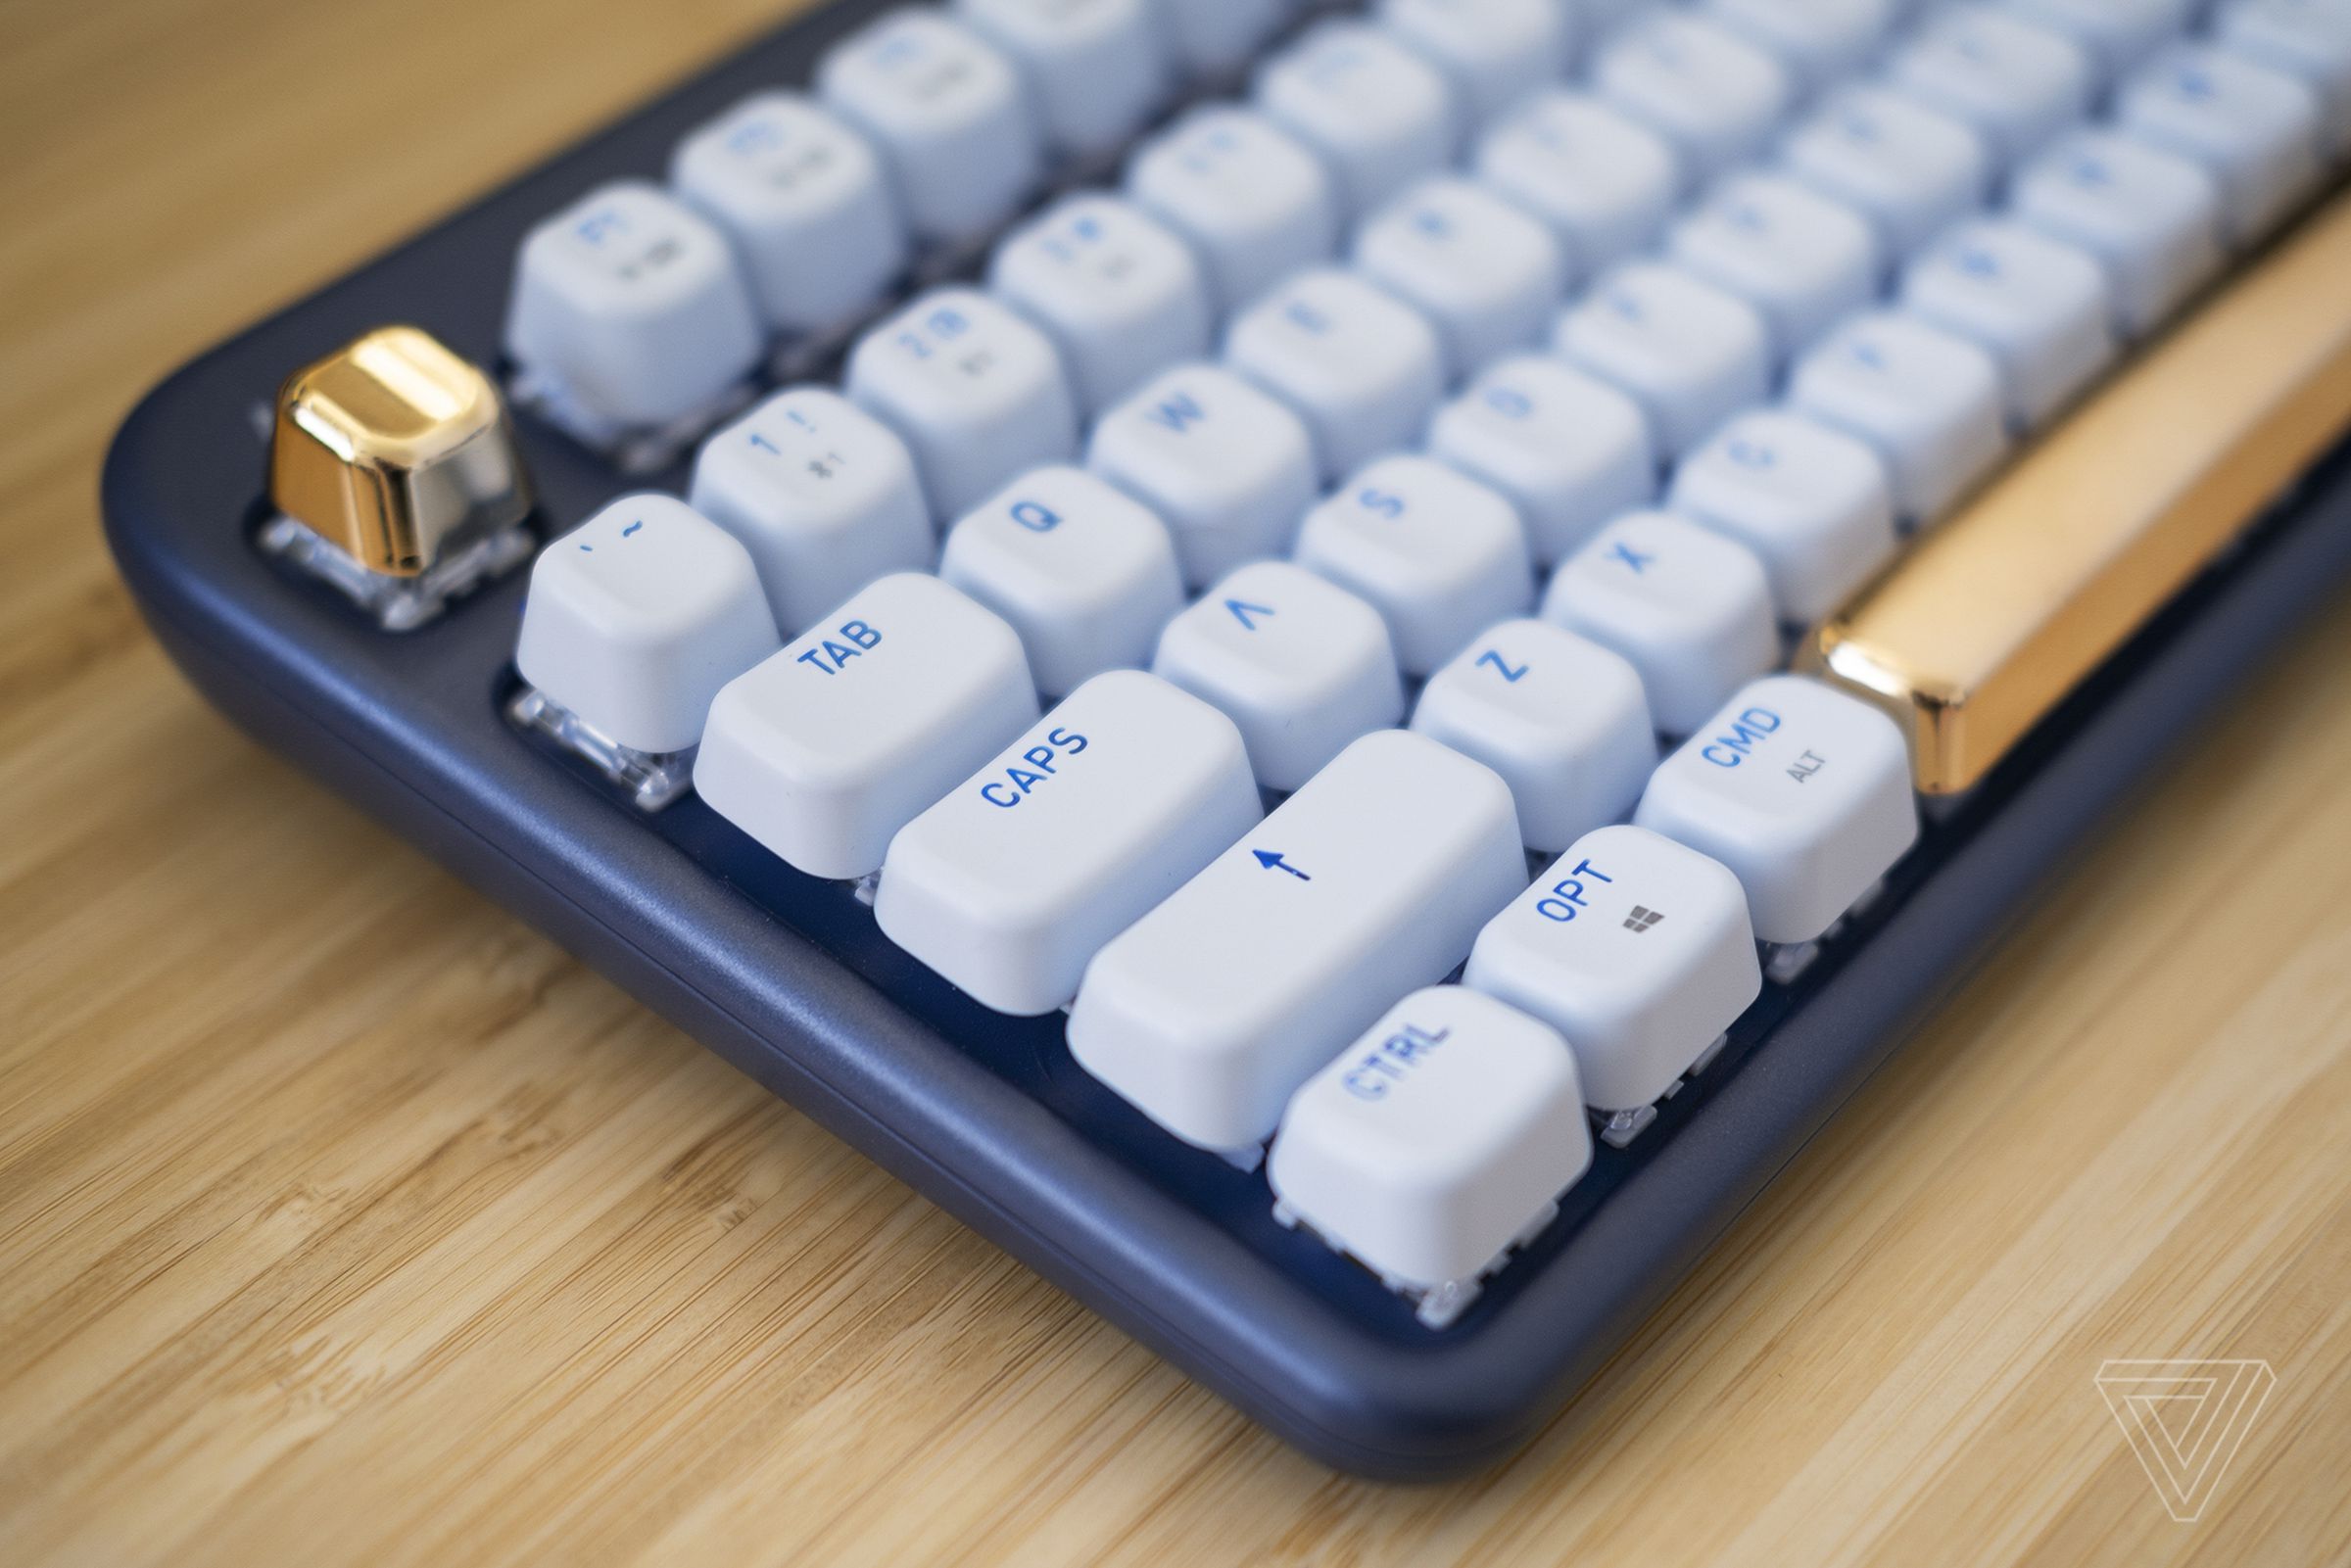 It’s keycaps have a rounded design that’s a bit of an acquired taste.